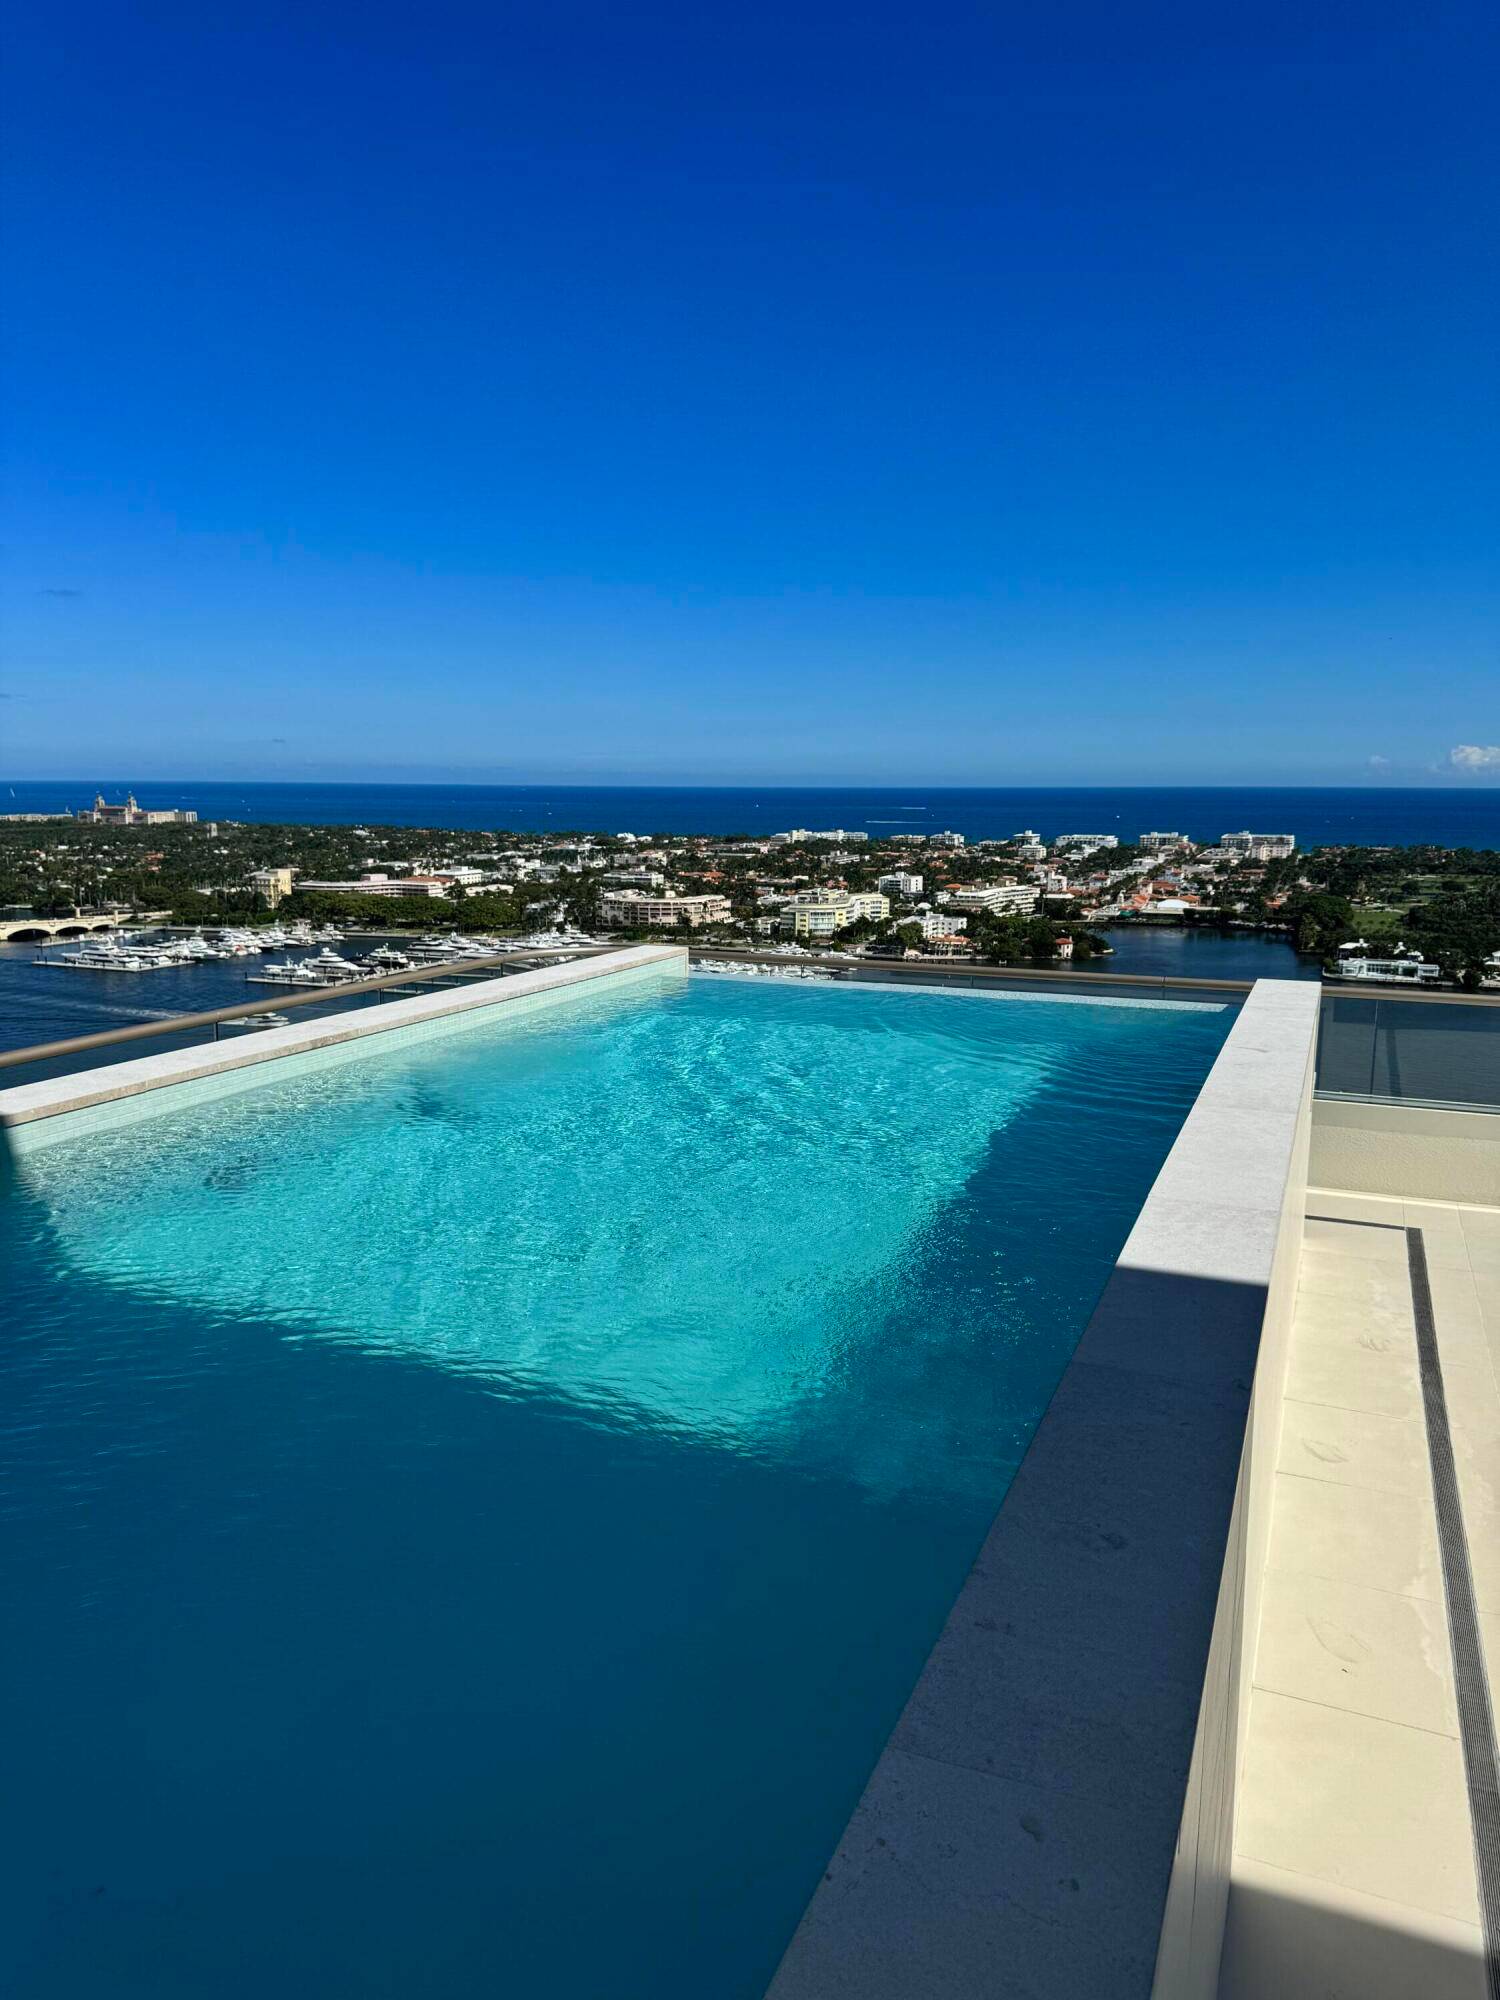 Live above it all ! This is your own private 11, 000 SF full floor Penthouse atop La Clara Palm Beach.